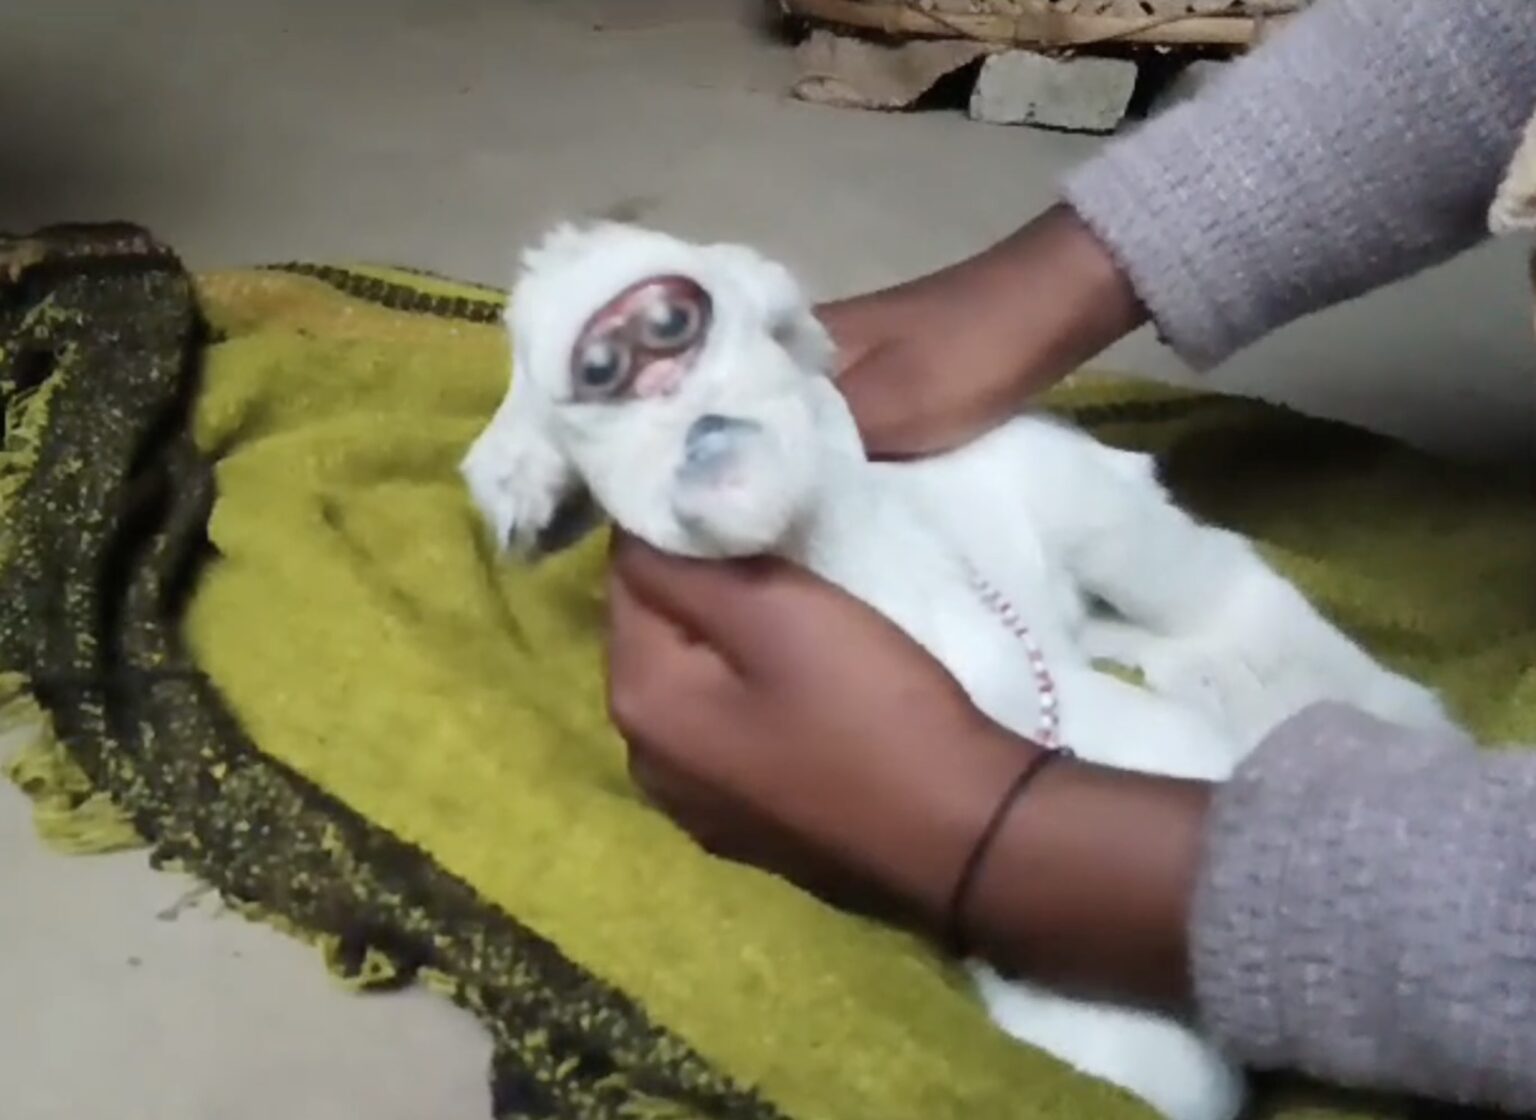 Video grab of the strange bizarre and looking goat born with a human face.